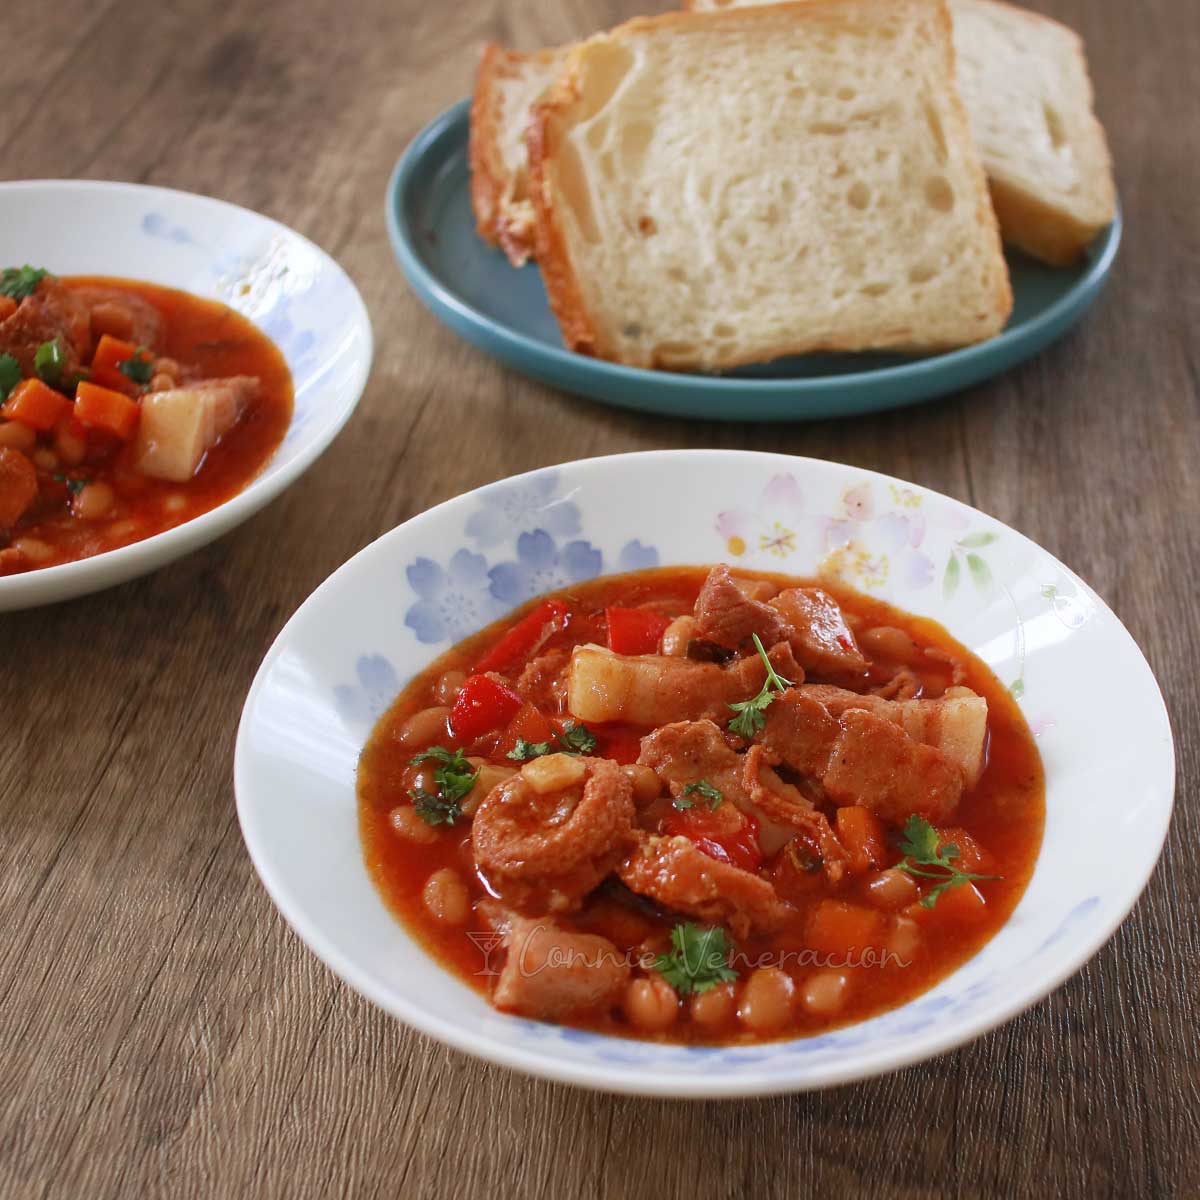 Pork, sausage and beans stew